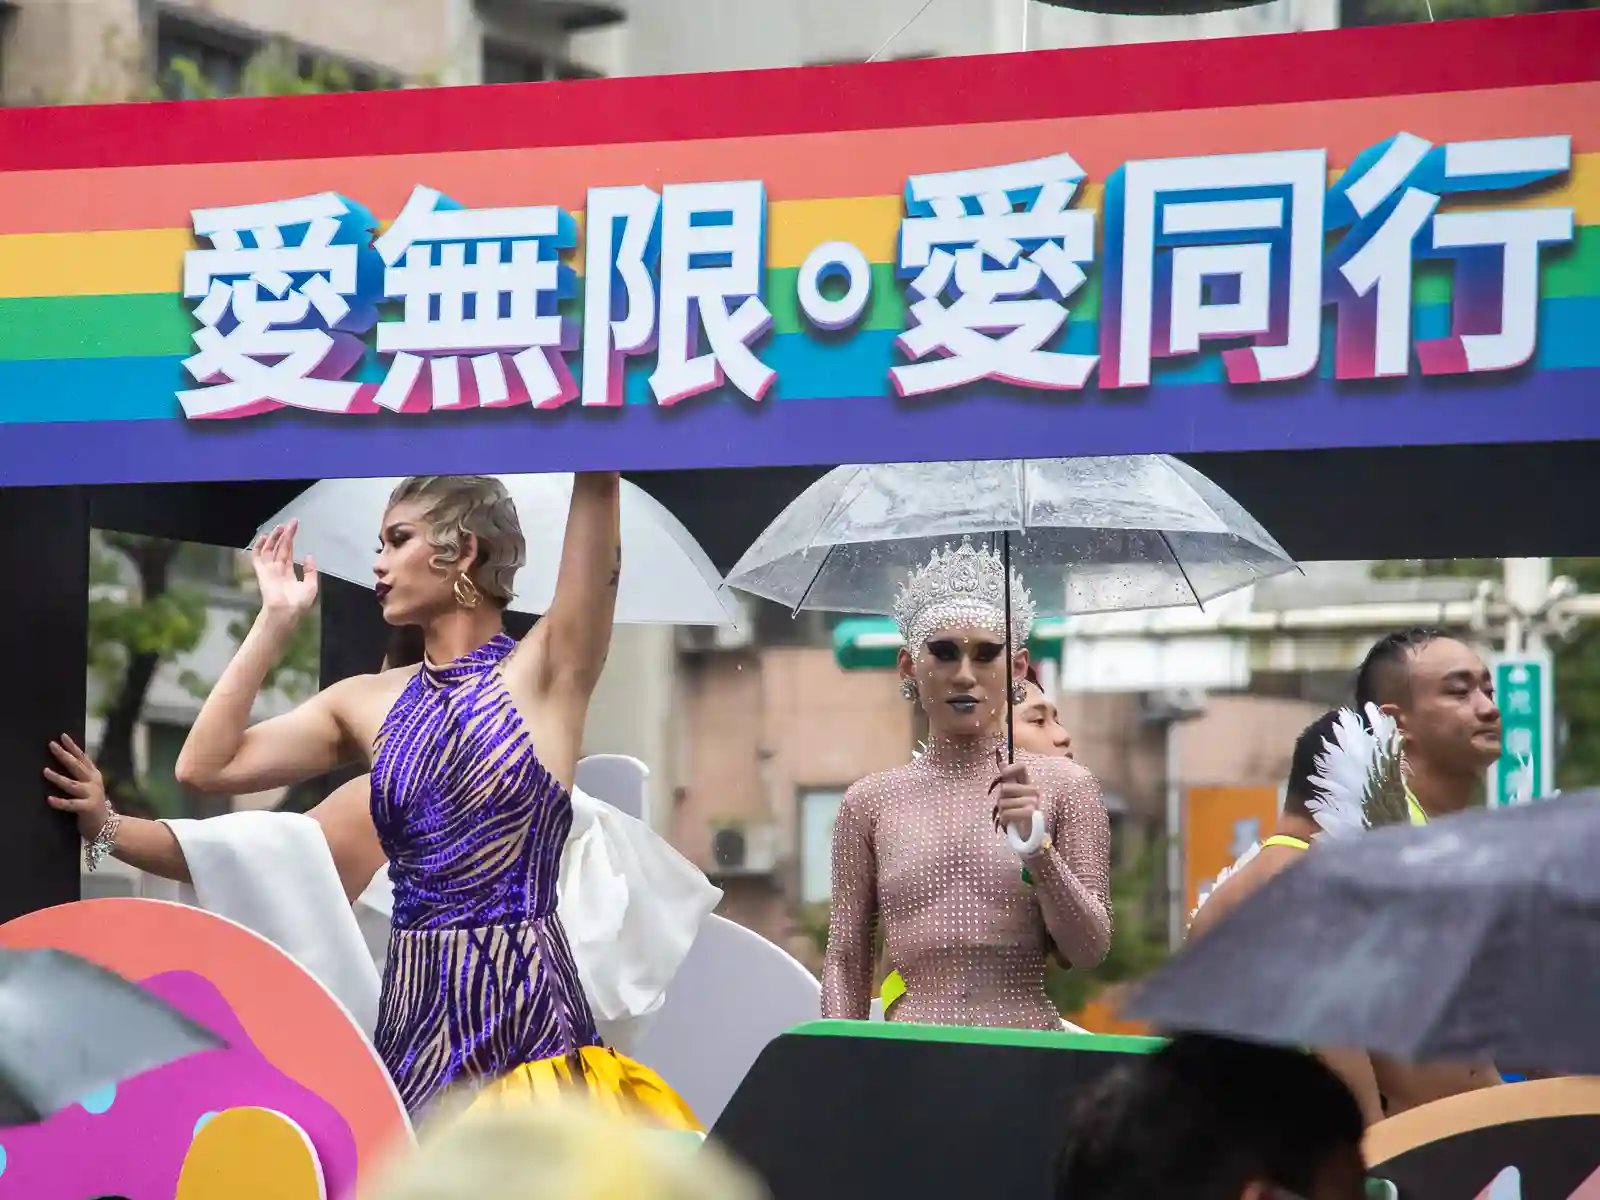 A rainbow banner reads: "love without limits".